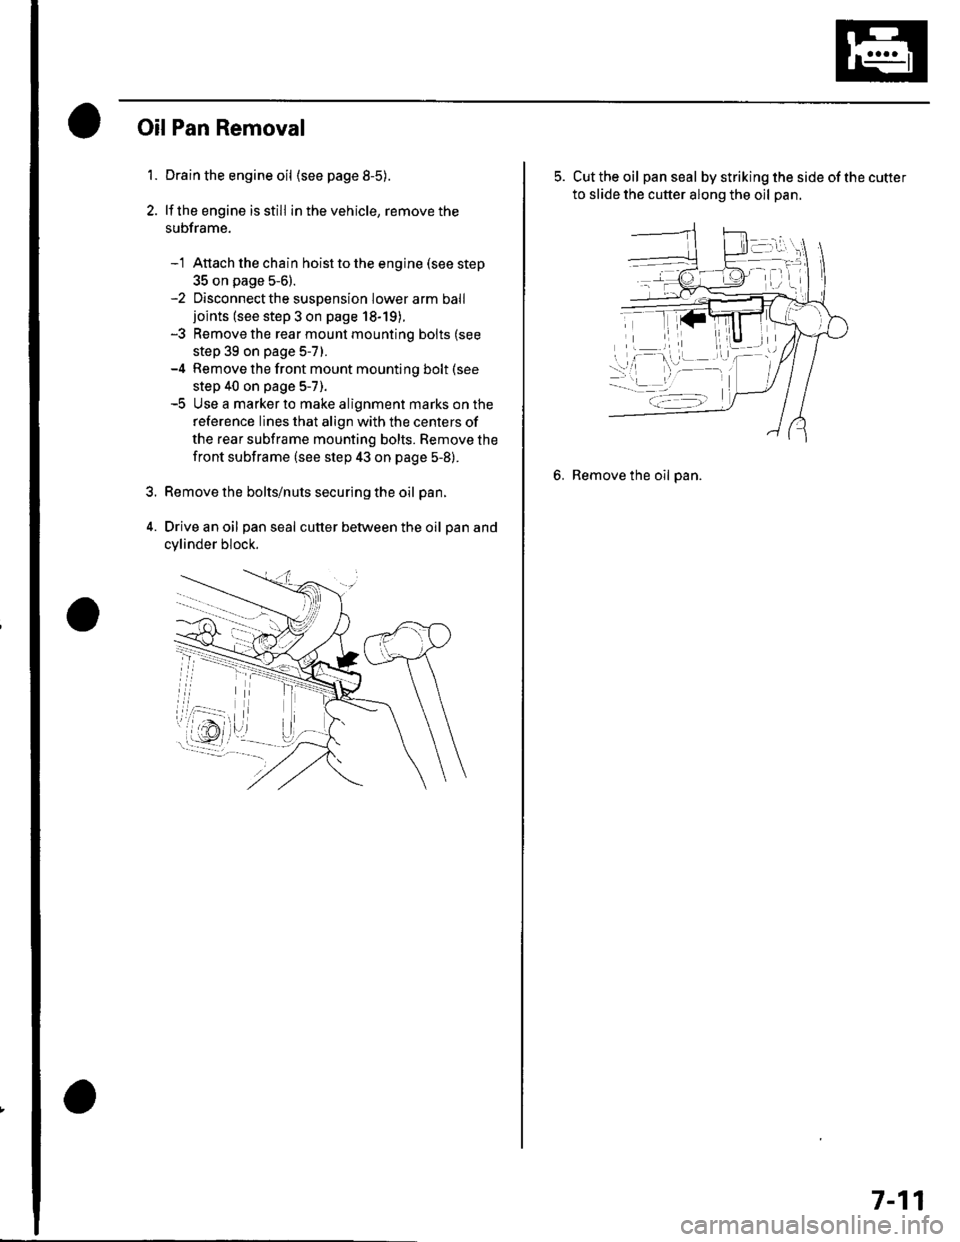 HONDA CIVIC 2003 7.G Workshop Manual 1.
OilPan Removal
Drain the engine oil (see page 8-5).
lf the engine is still in the vehicle, remove the
subframe.
-1 Attach the chain hoist to the engine (see step
35 on page 5-6).-2 Disconnectthe su